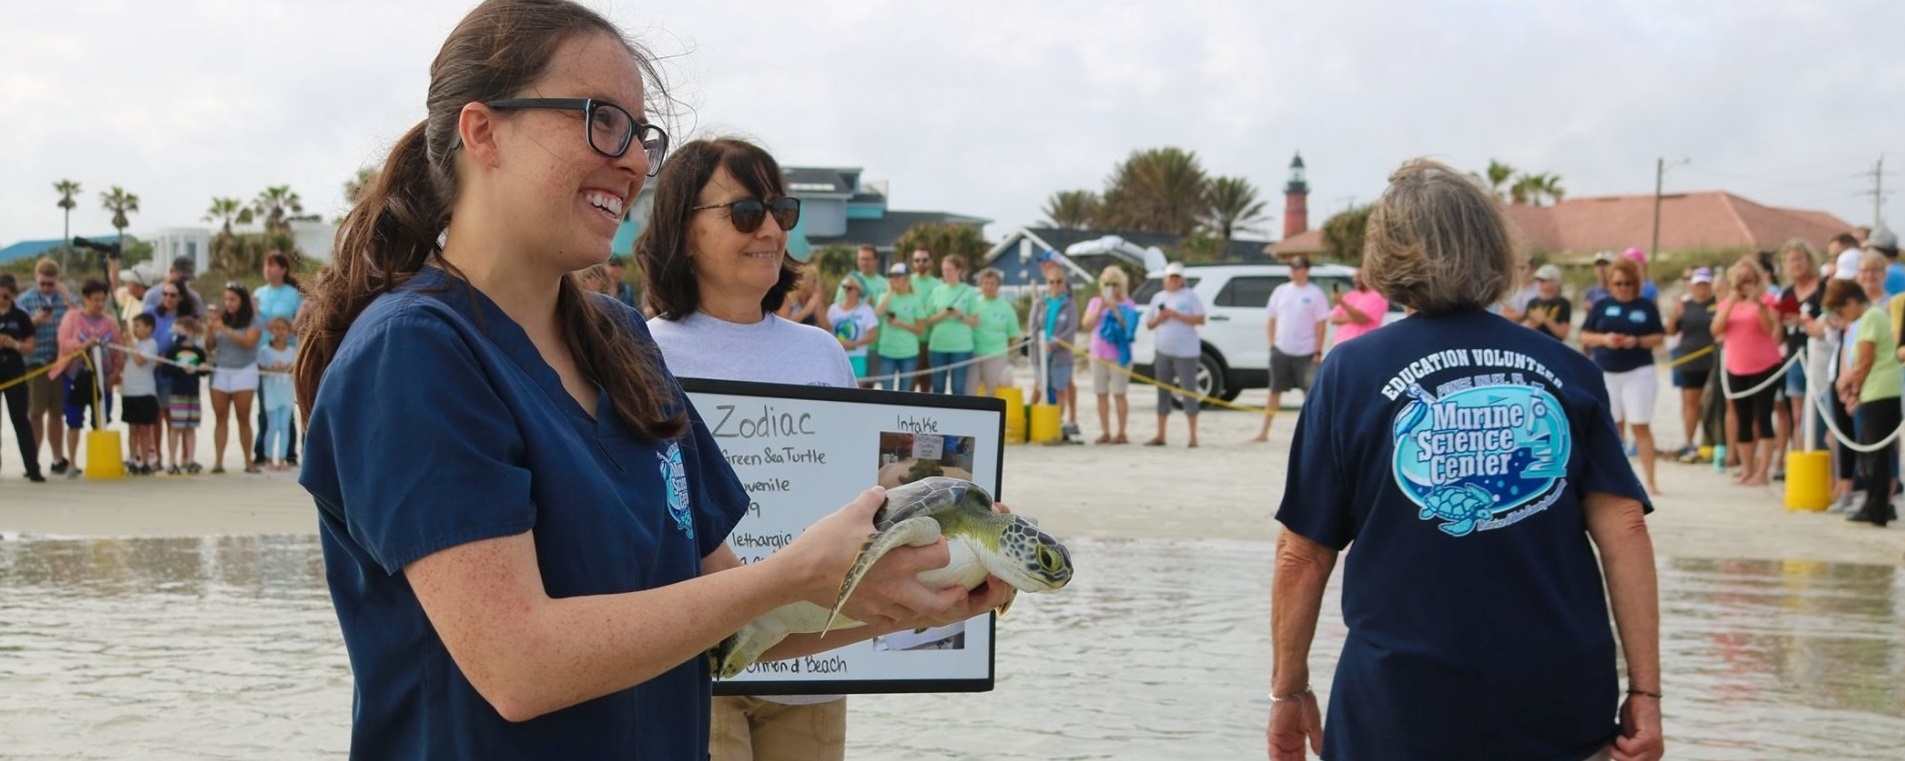 rehabilitated sea turtle releases into the ocean from the beach